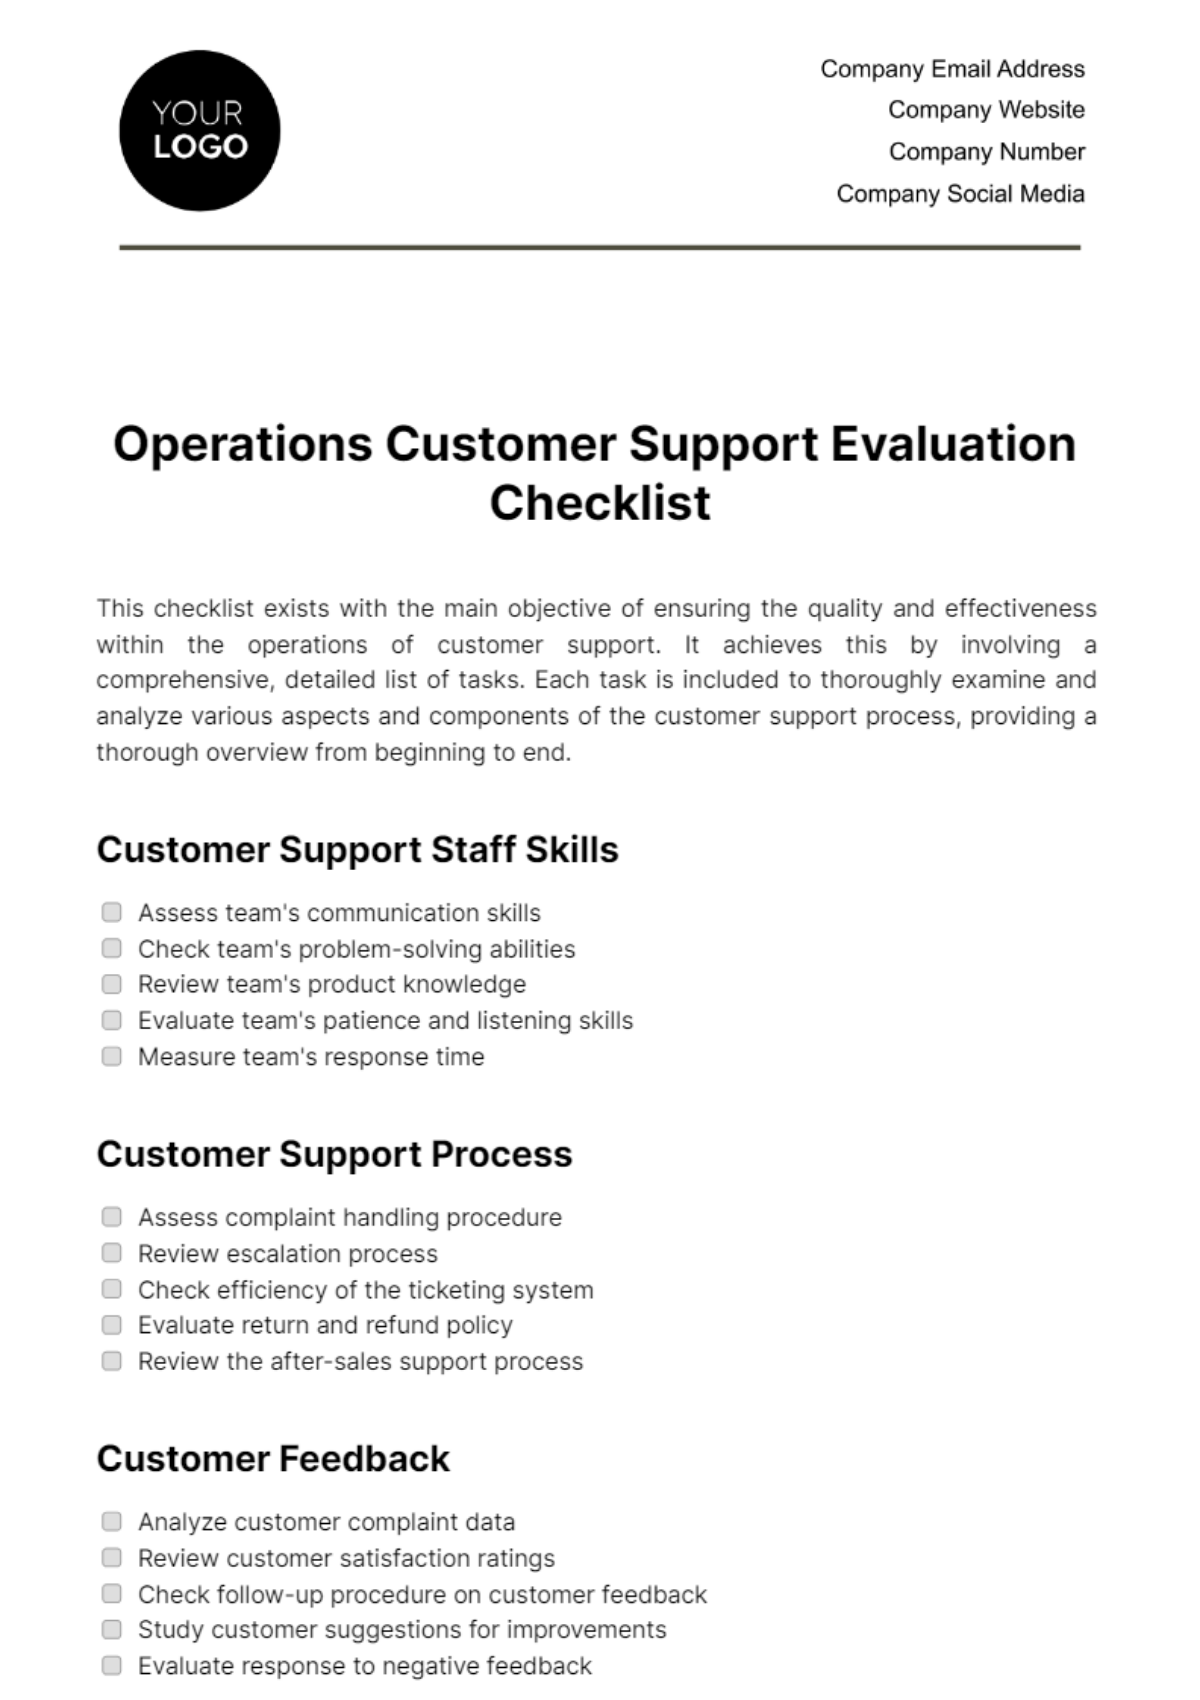 Free Operations Customer Support Evaluation Checklist Template